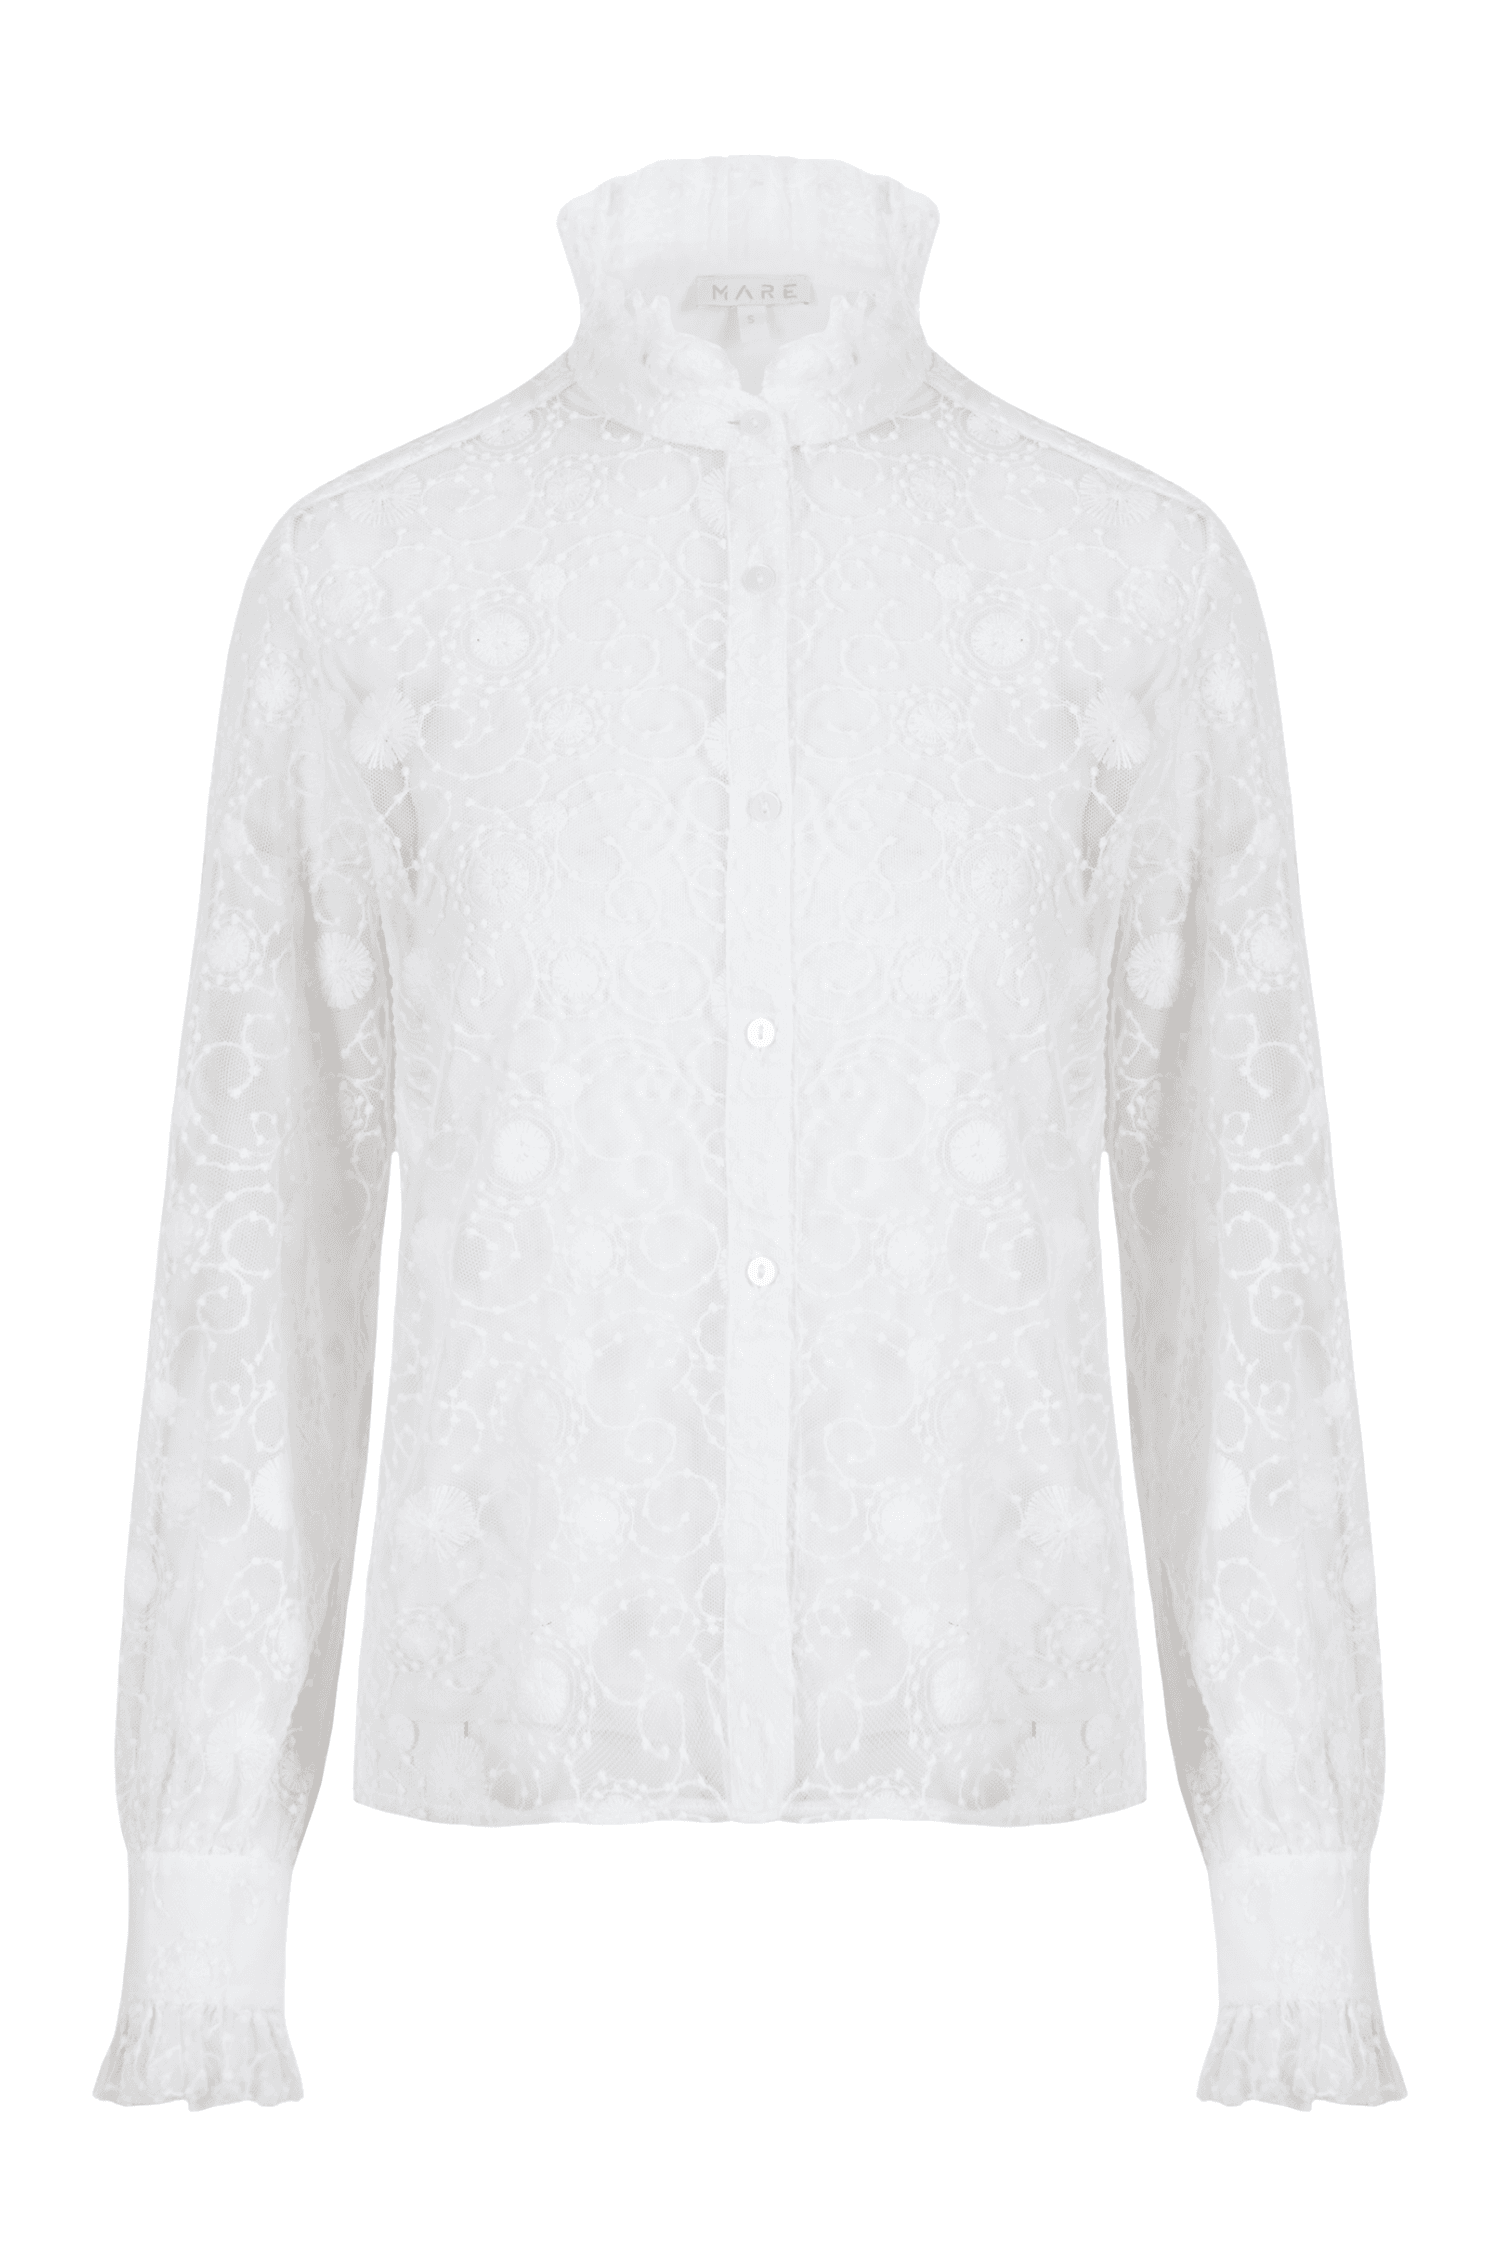 Queen Neck Transparent Flower Pattern White Embroidery Shirt